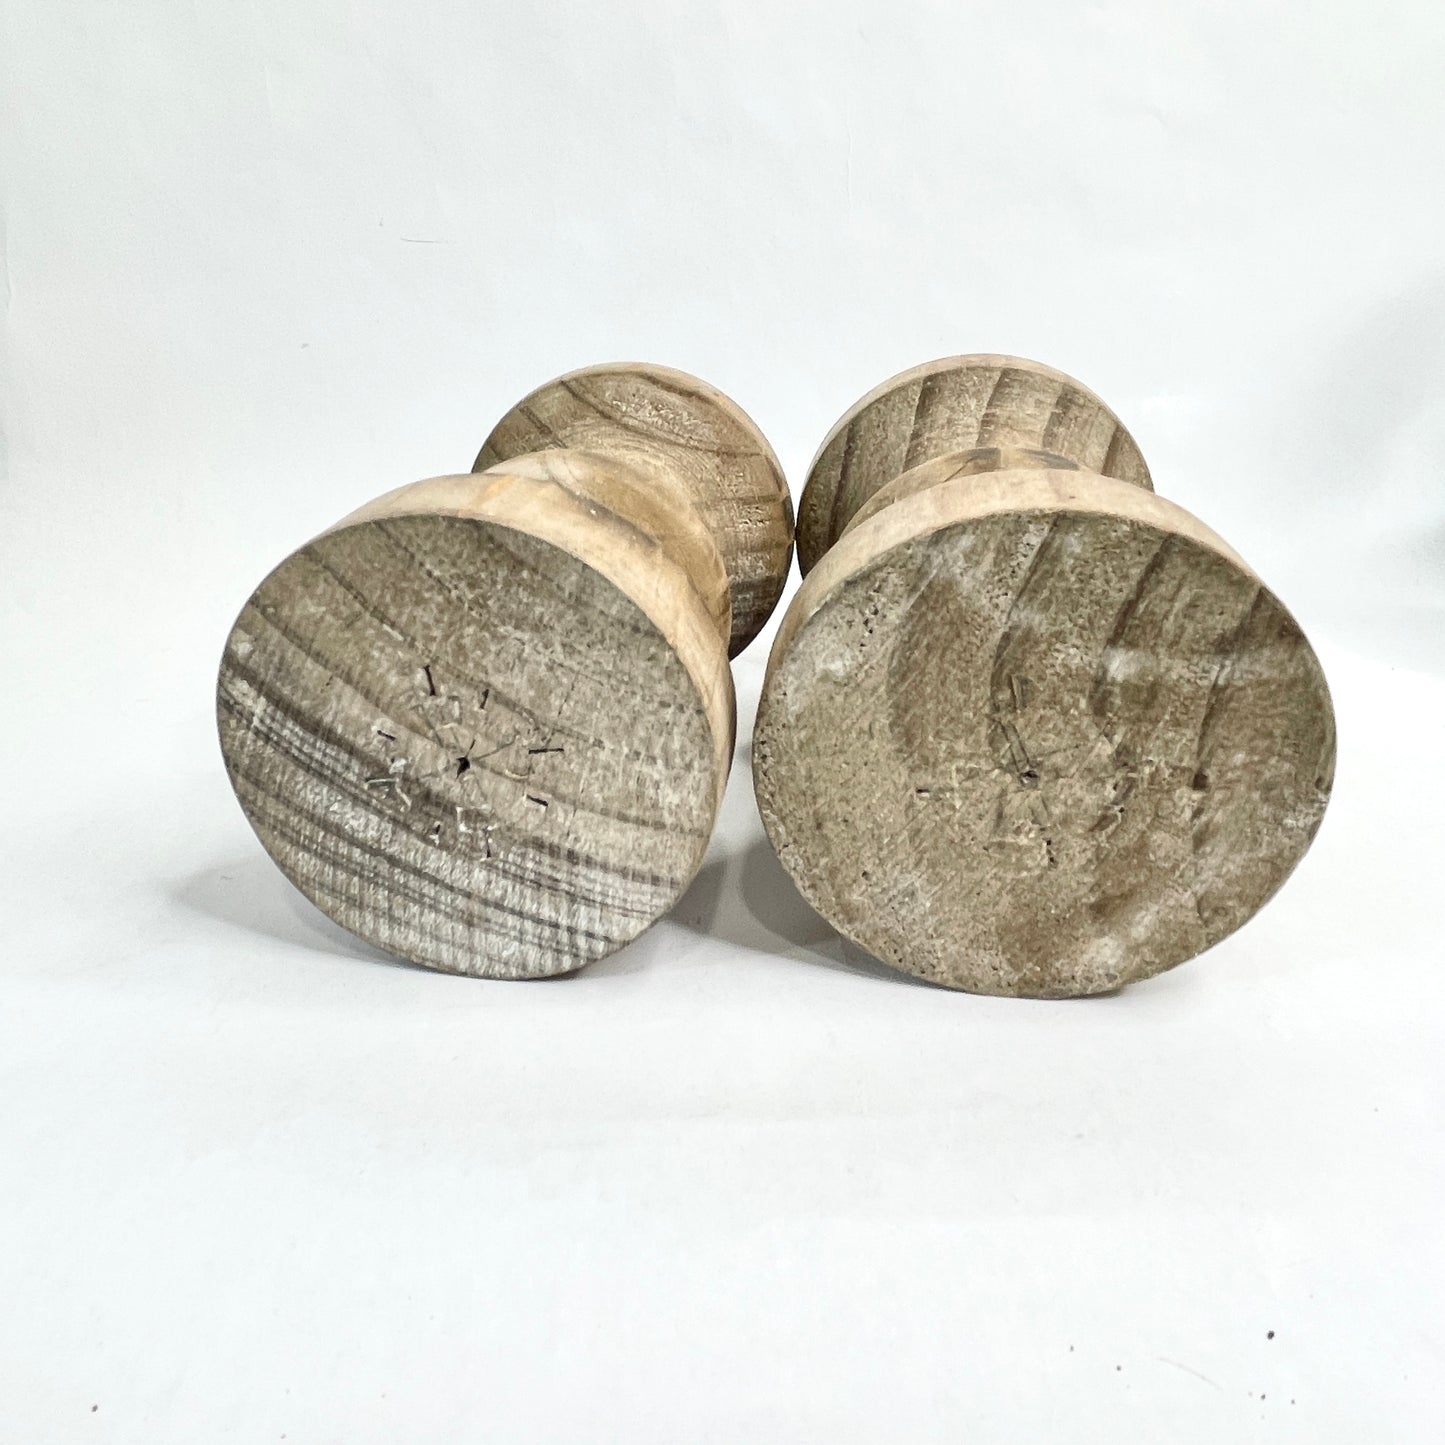 Wood Candle Holders - sold individually